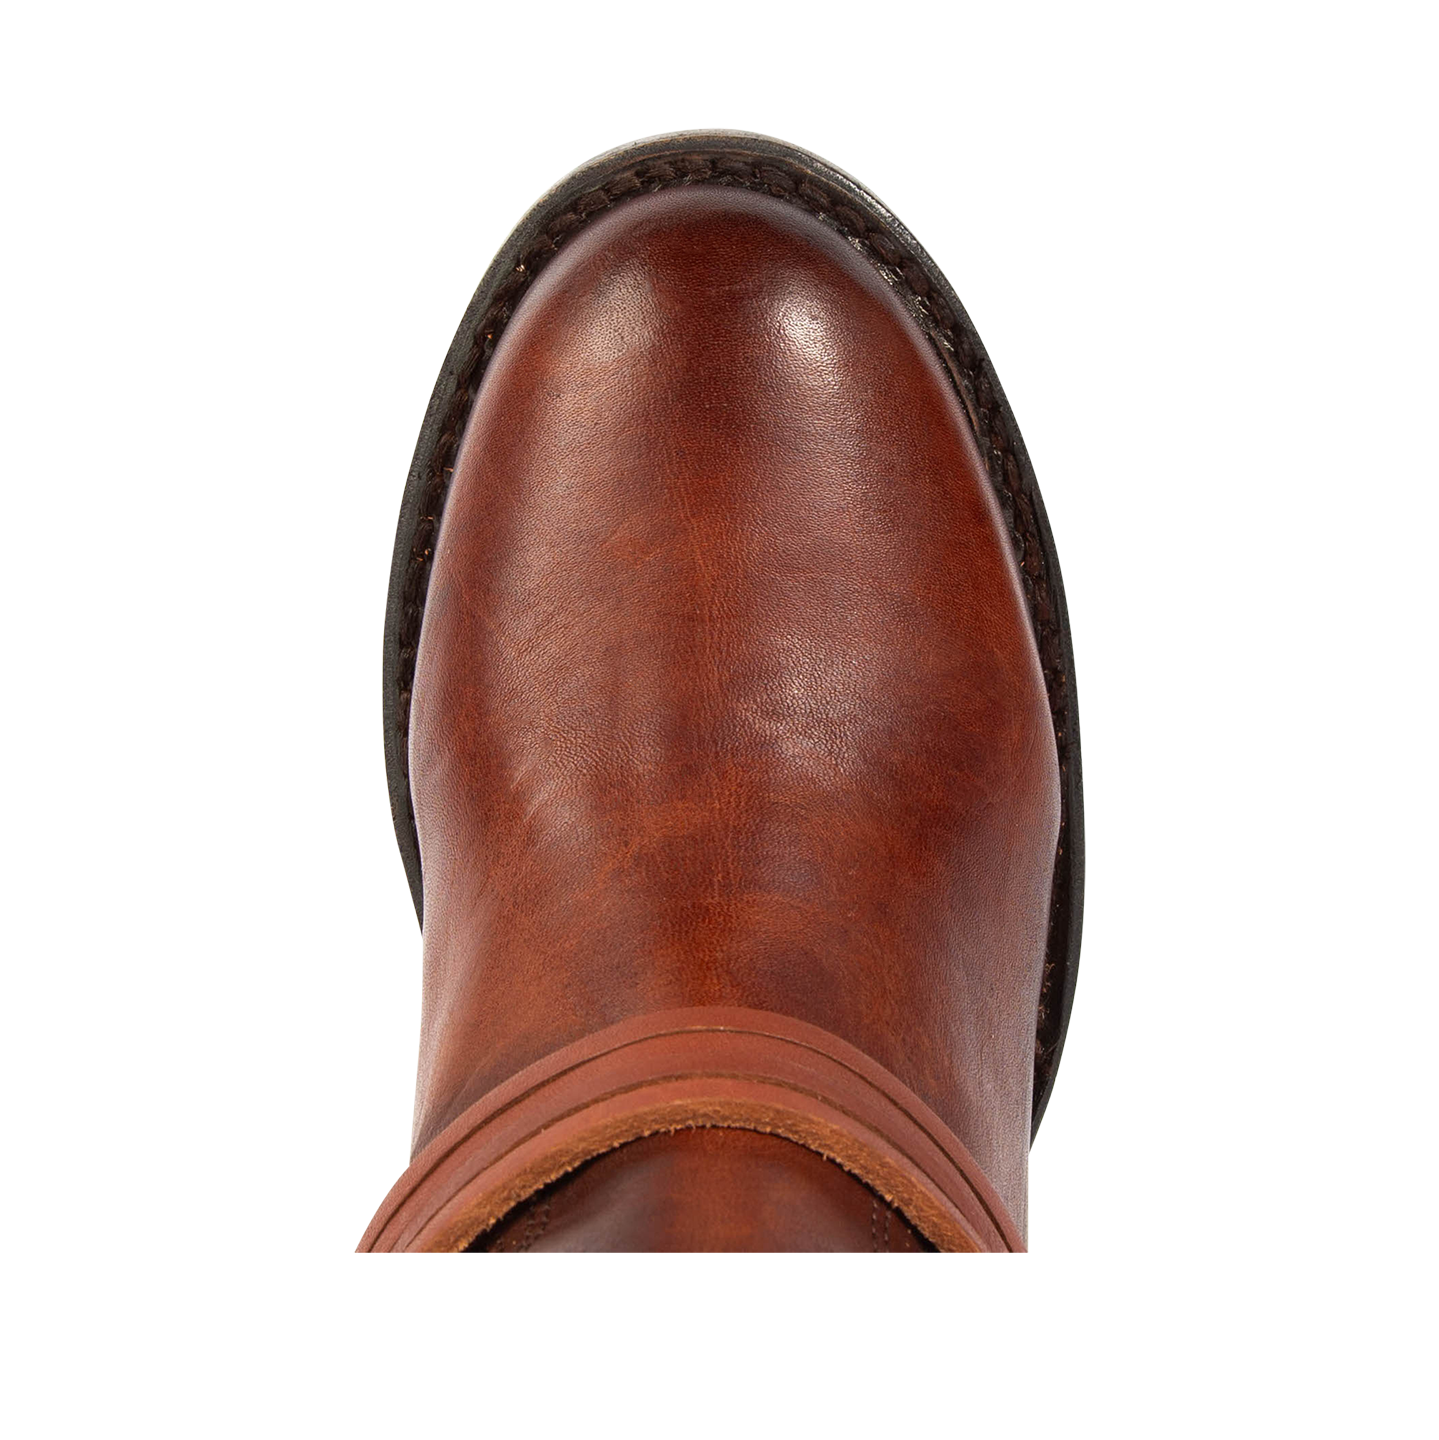 Top view showing round toe and leather ankle lacing on FREEBIRD women's Coal cognac tall boot